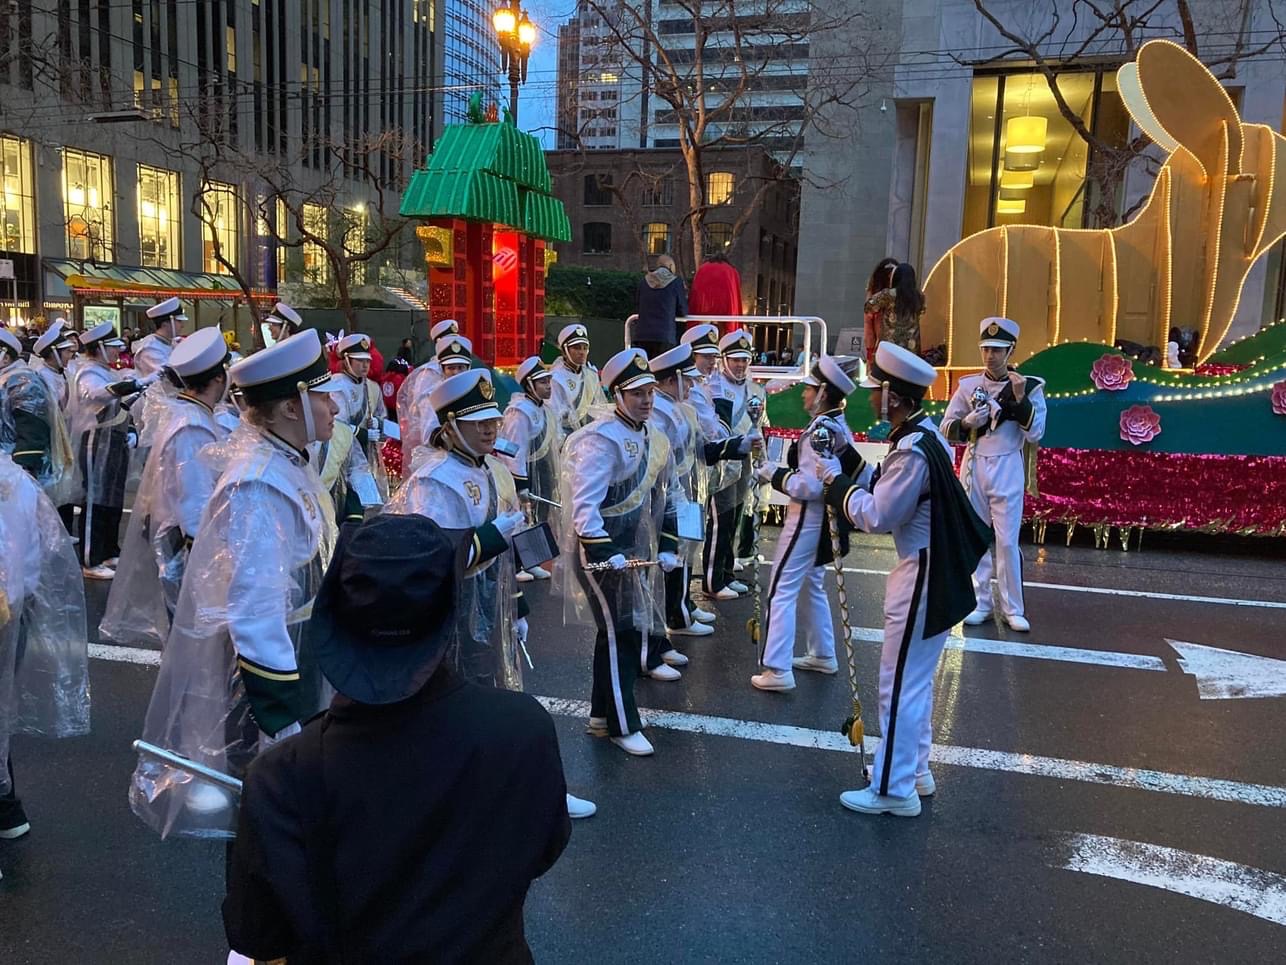 Band members perform while marching down a city street at dusk